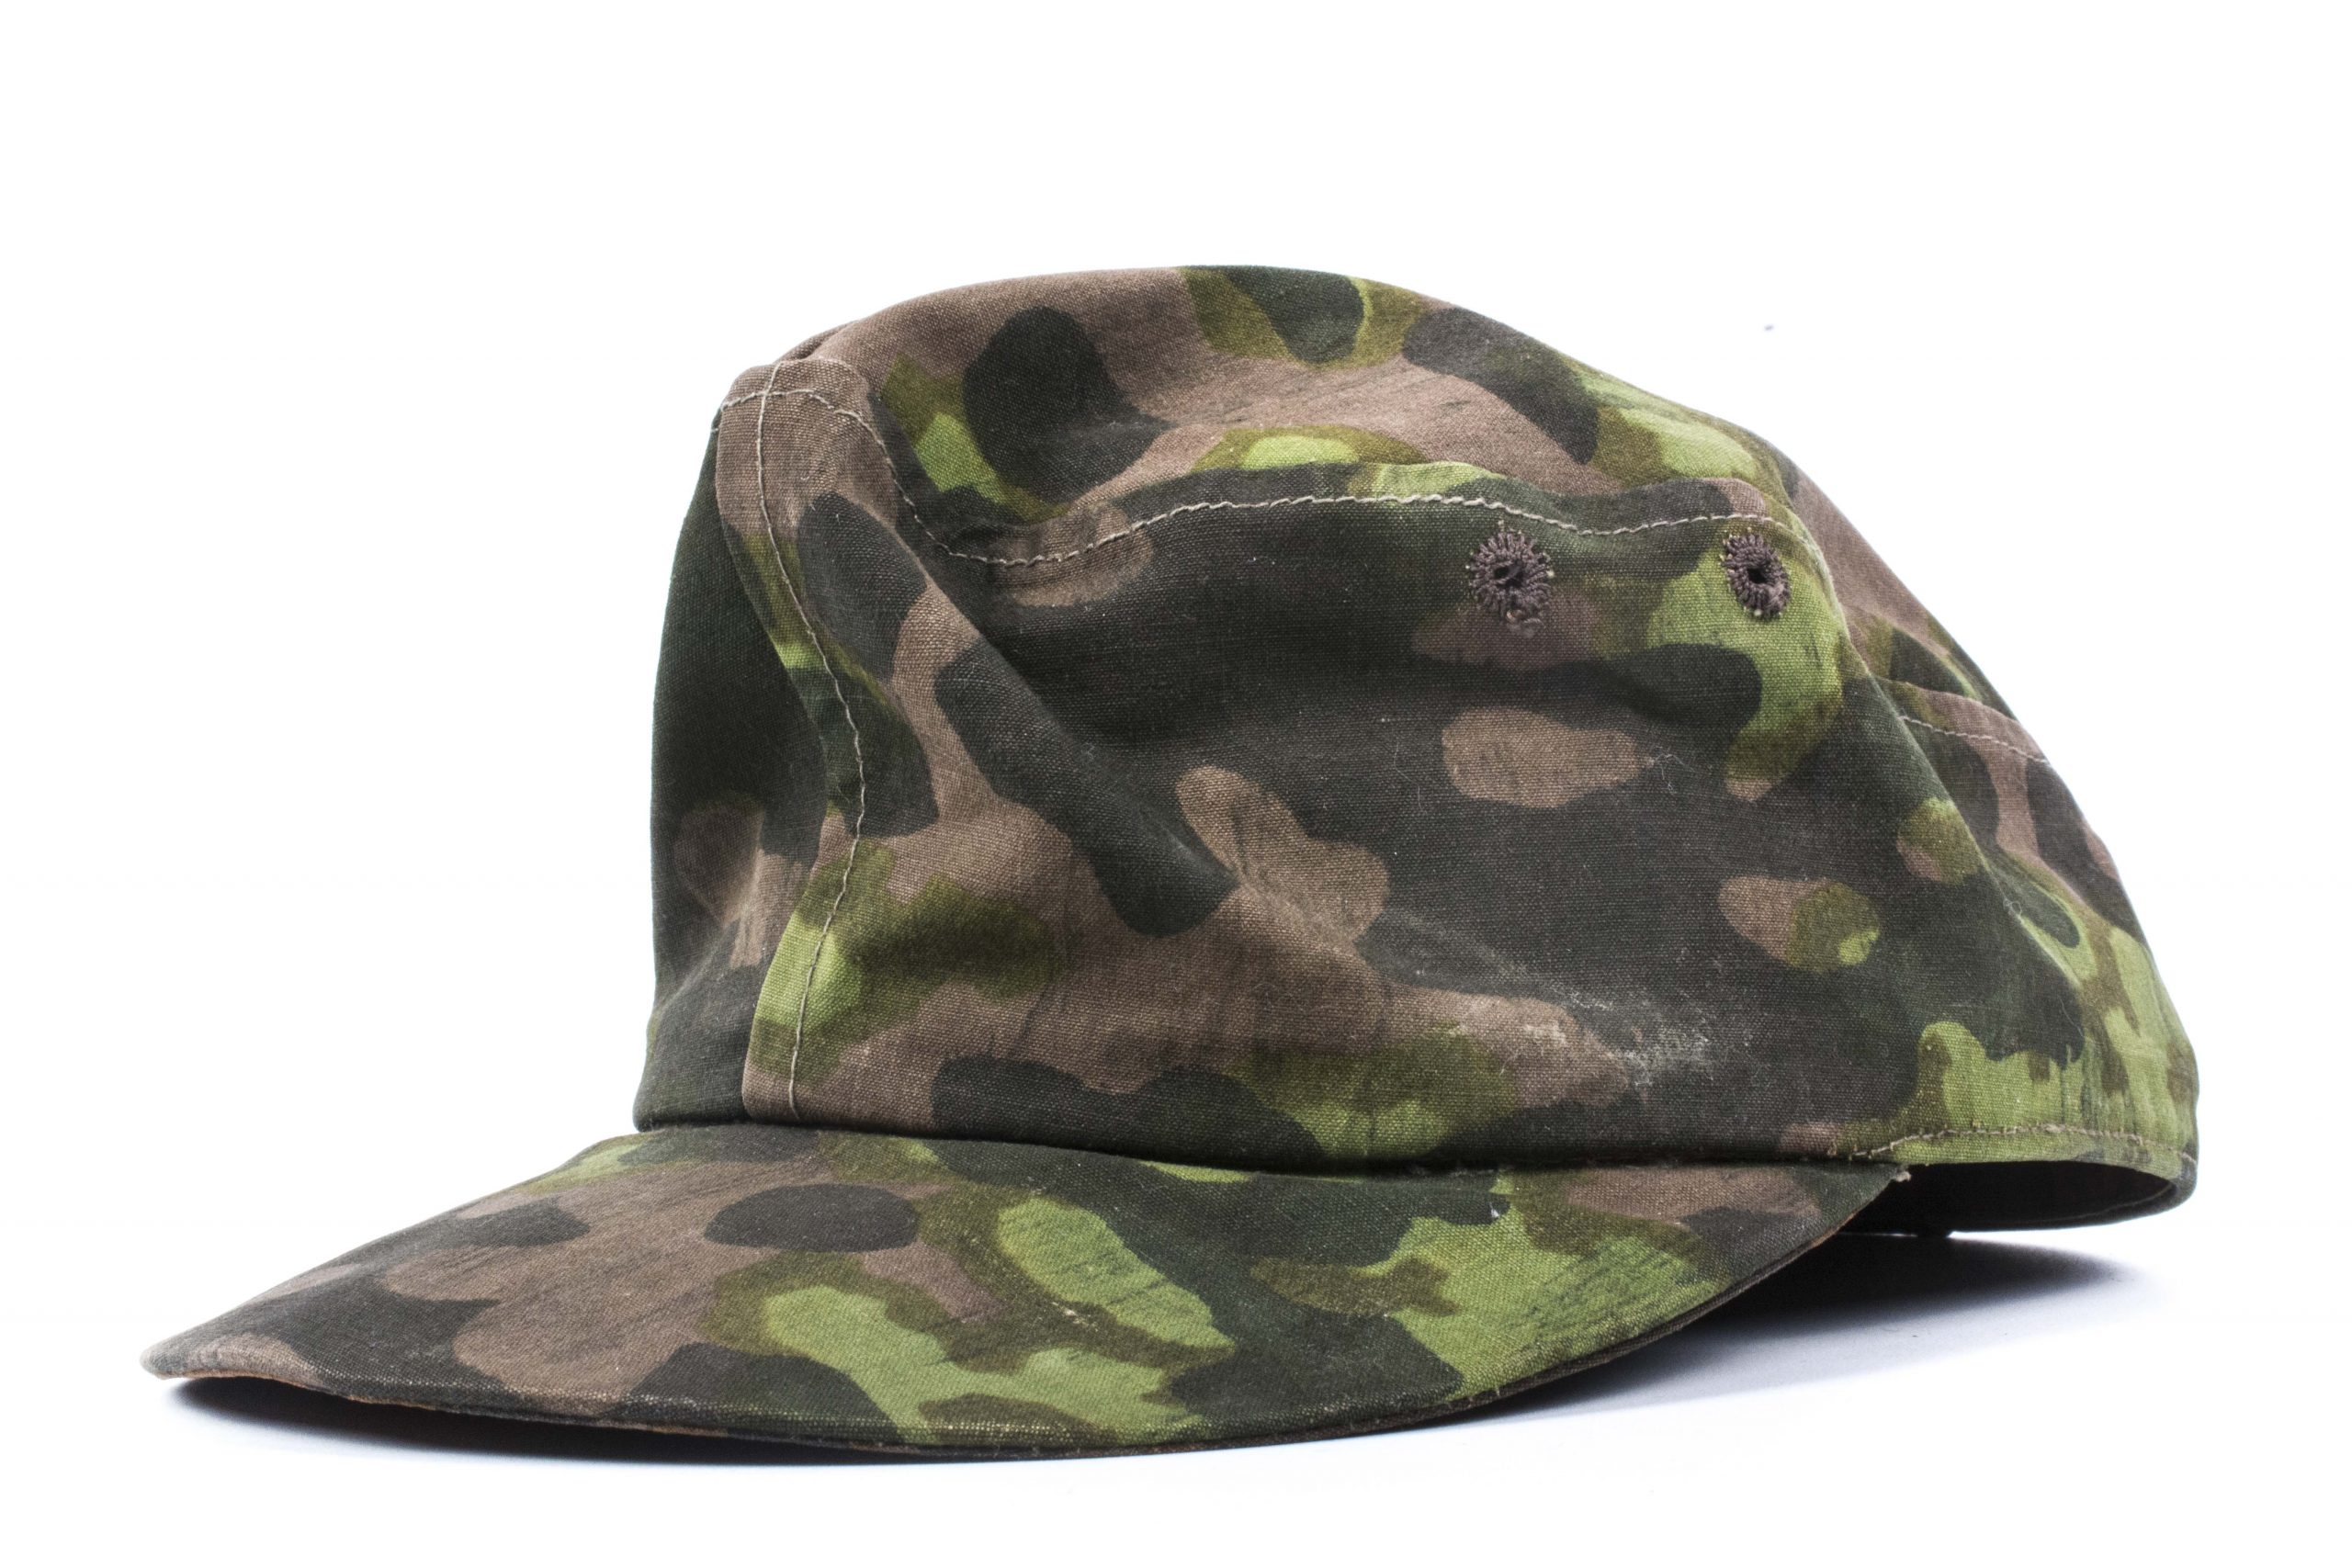 Textbook Waffen-SS M42 camouflage cap in Plane tree – fjm44